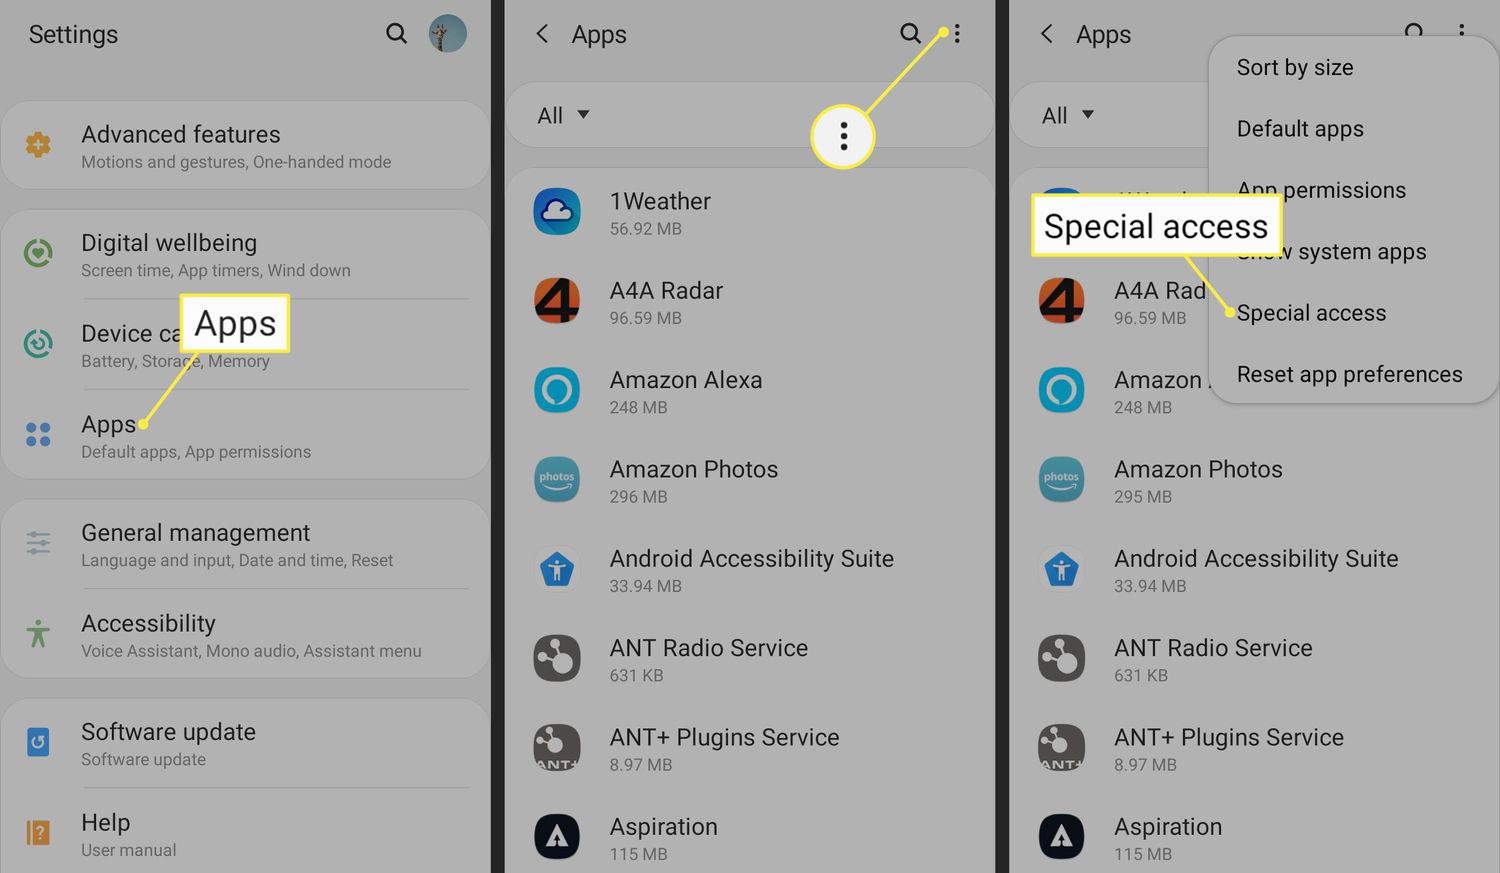 How to install APK files on Android